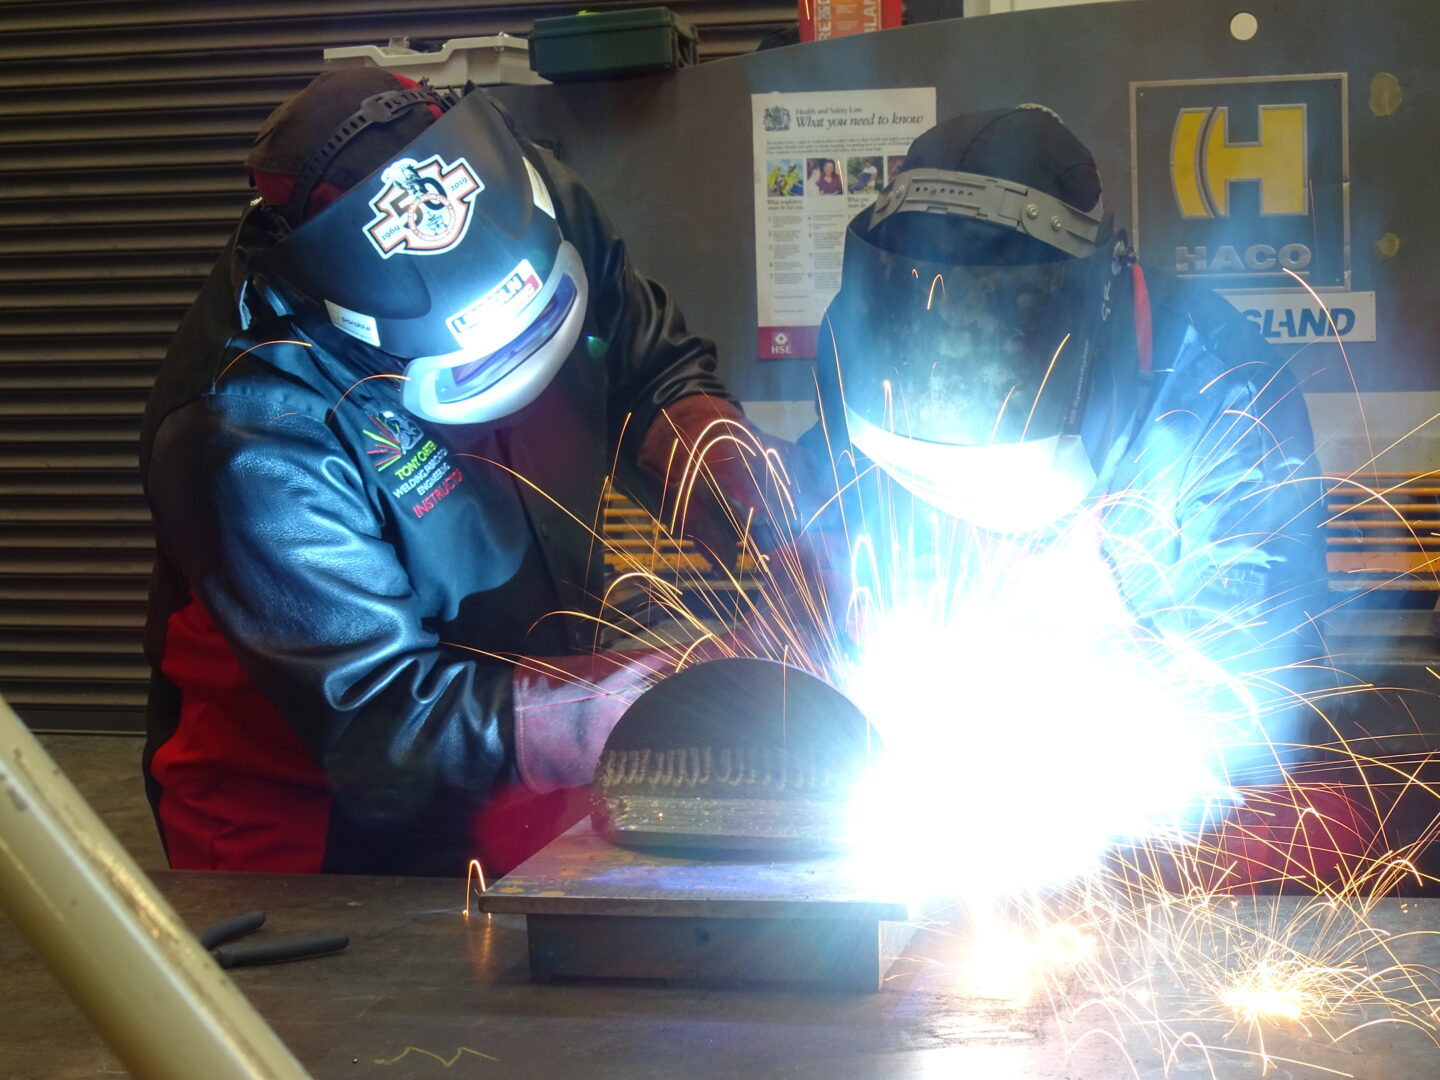 welding students welding a piece of metal as sparks fly from it